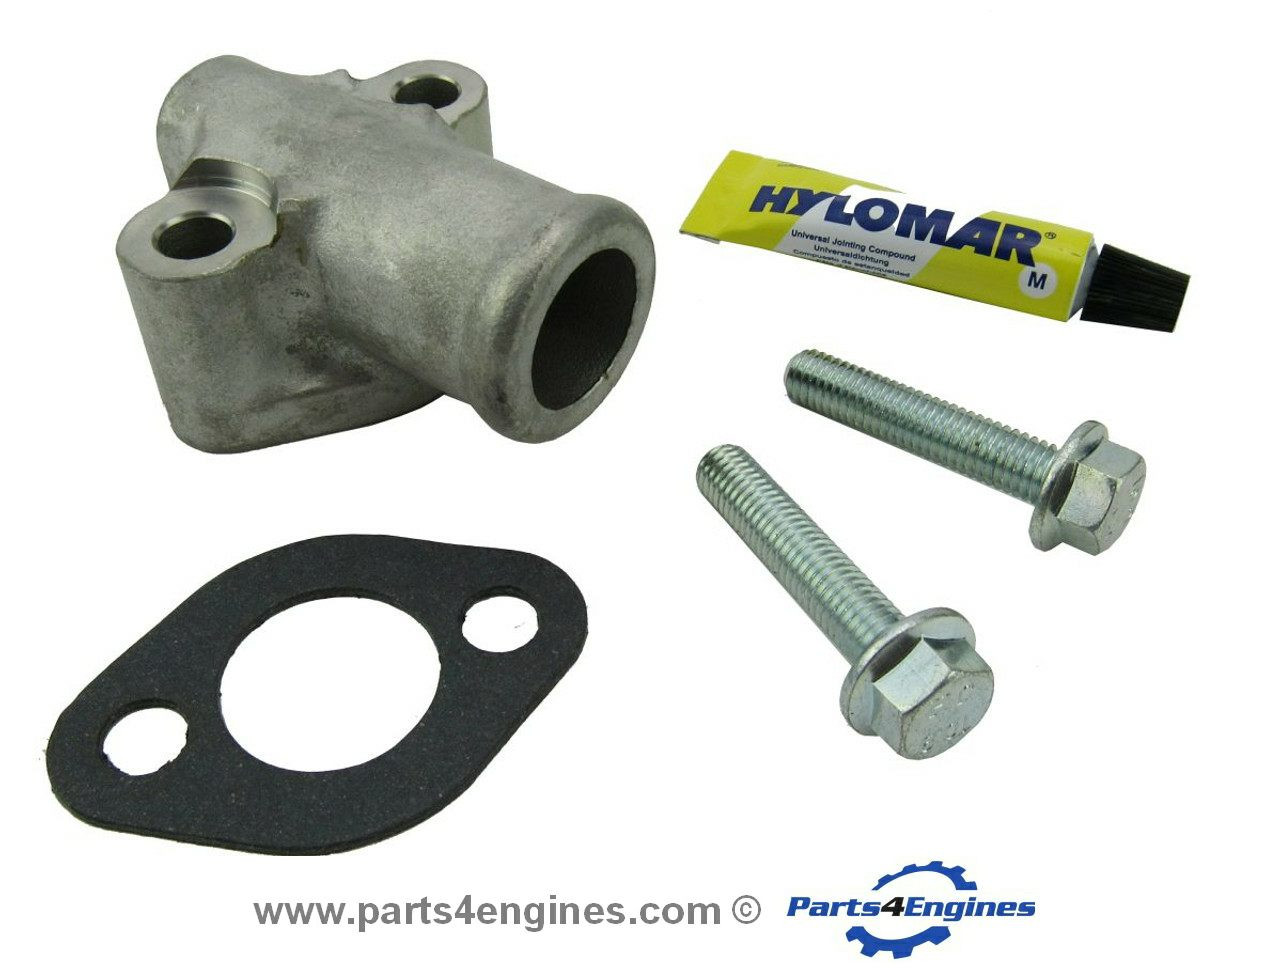 Perkins M50 exhaust elbow connector kit from parts4engines.com